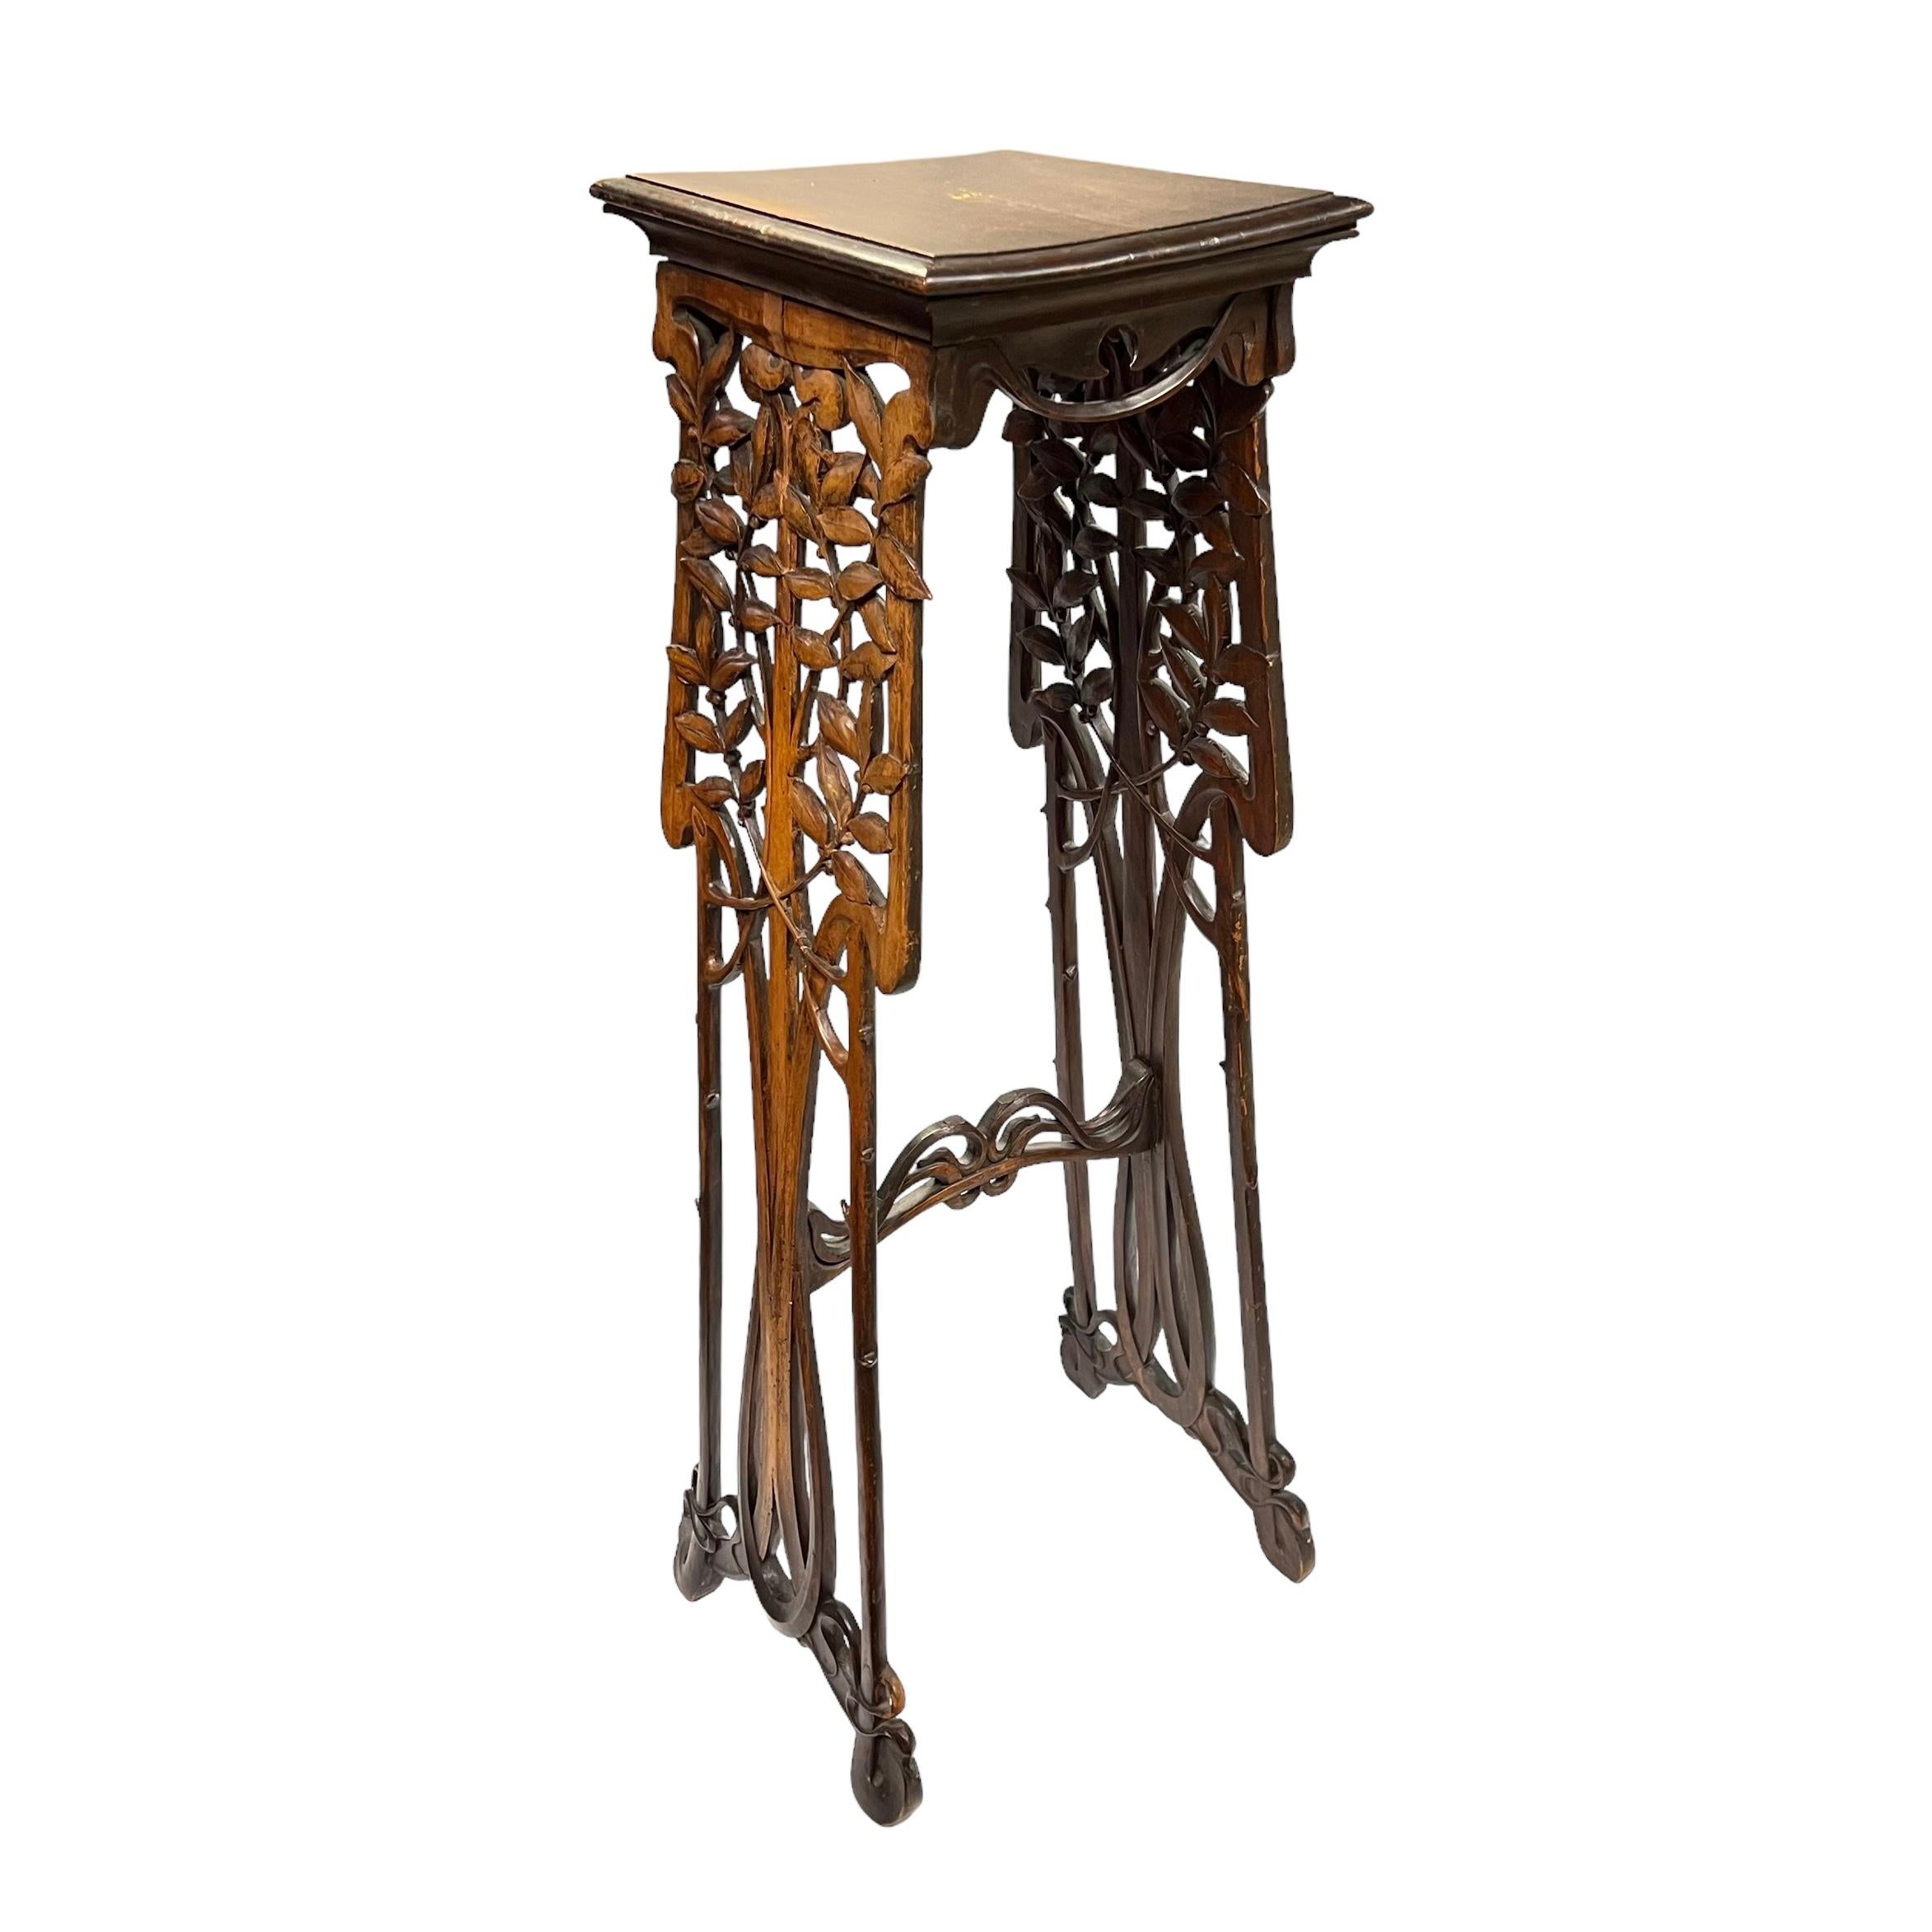 Lovely antique Art Nouveau period tall plant stand with finely carved organic motifs.  47 inches tall.  Original stained finish with patina that reflects its age.  Likely of French or English origin.